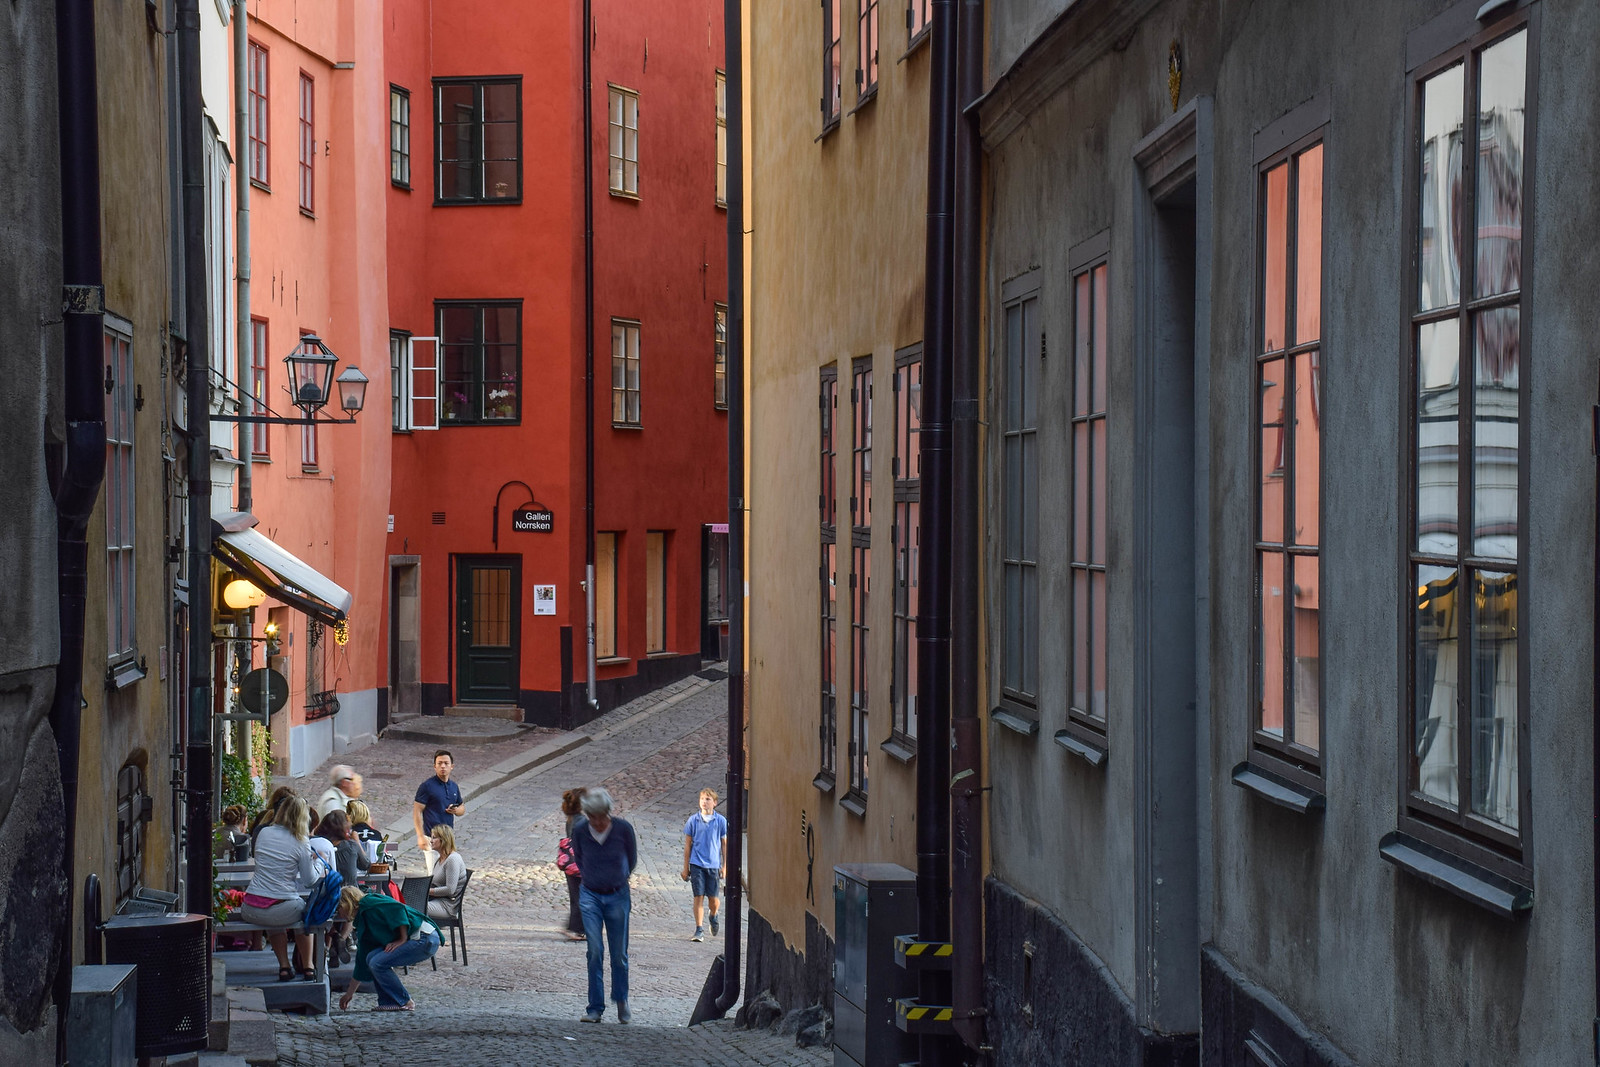 Taking a walking tour is a great way to see Gamla Stan